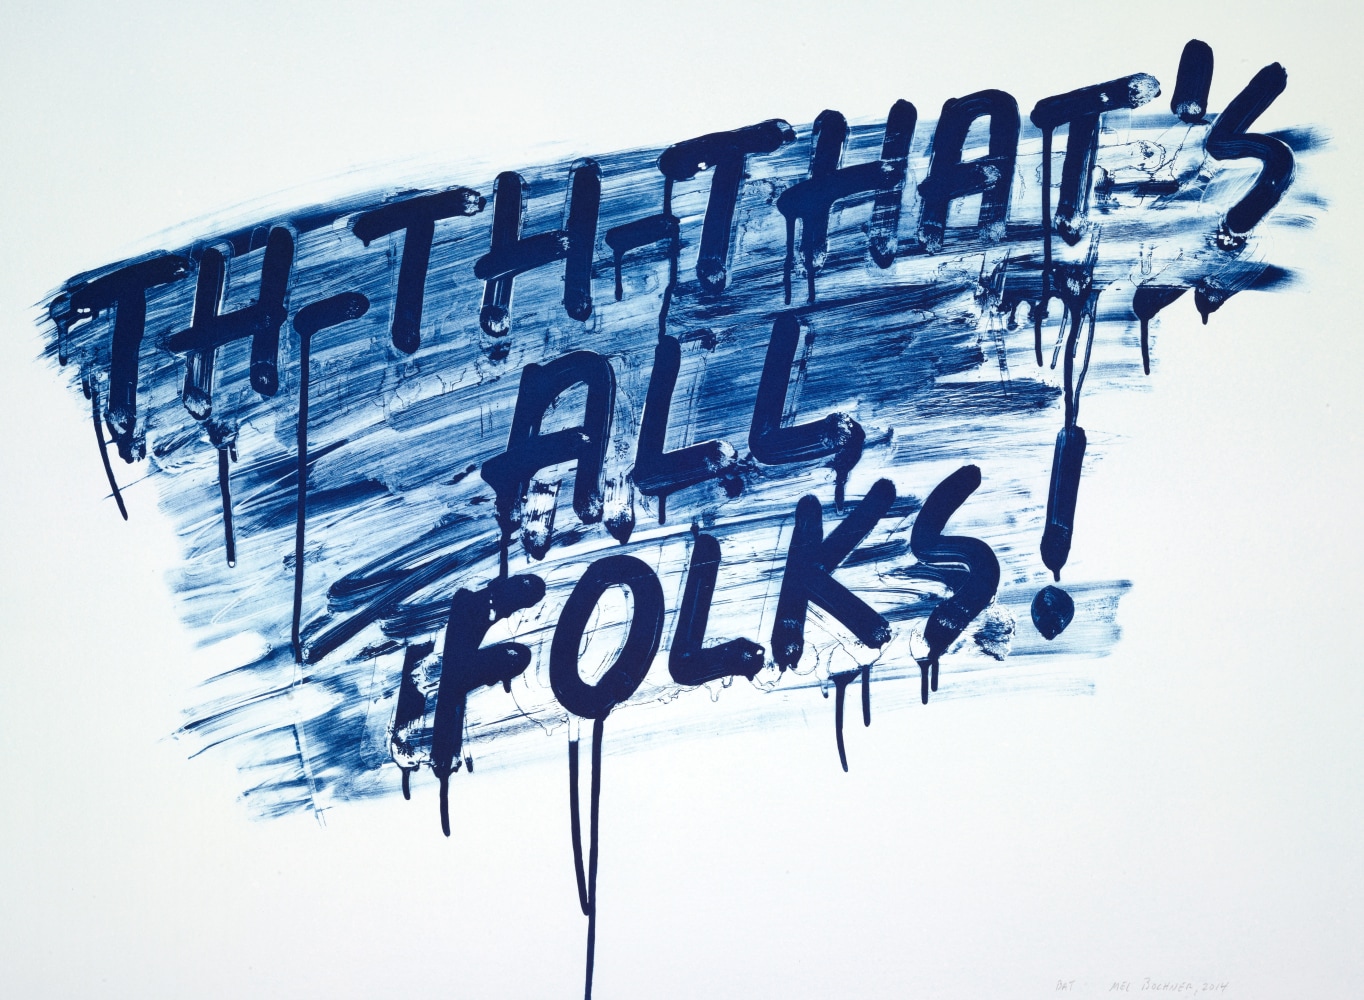 That&amp;#39;s All Folks!, 2014
Etching with aquatint
22 x 30 inches
Edition of 20